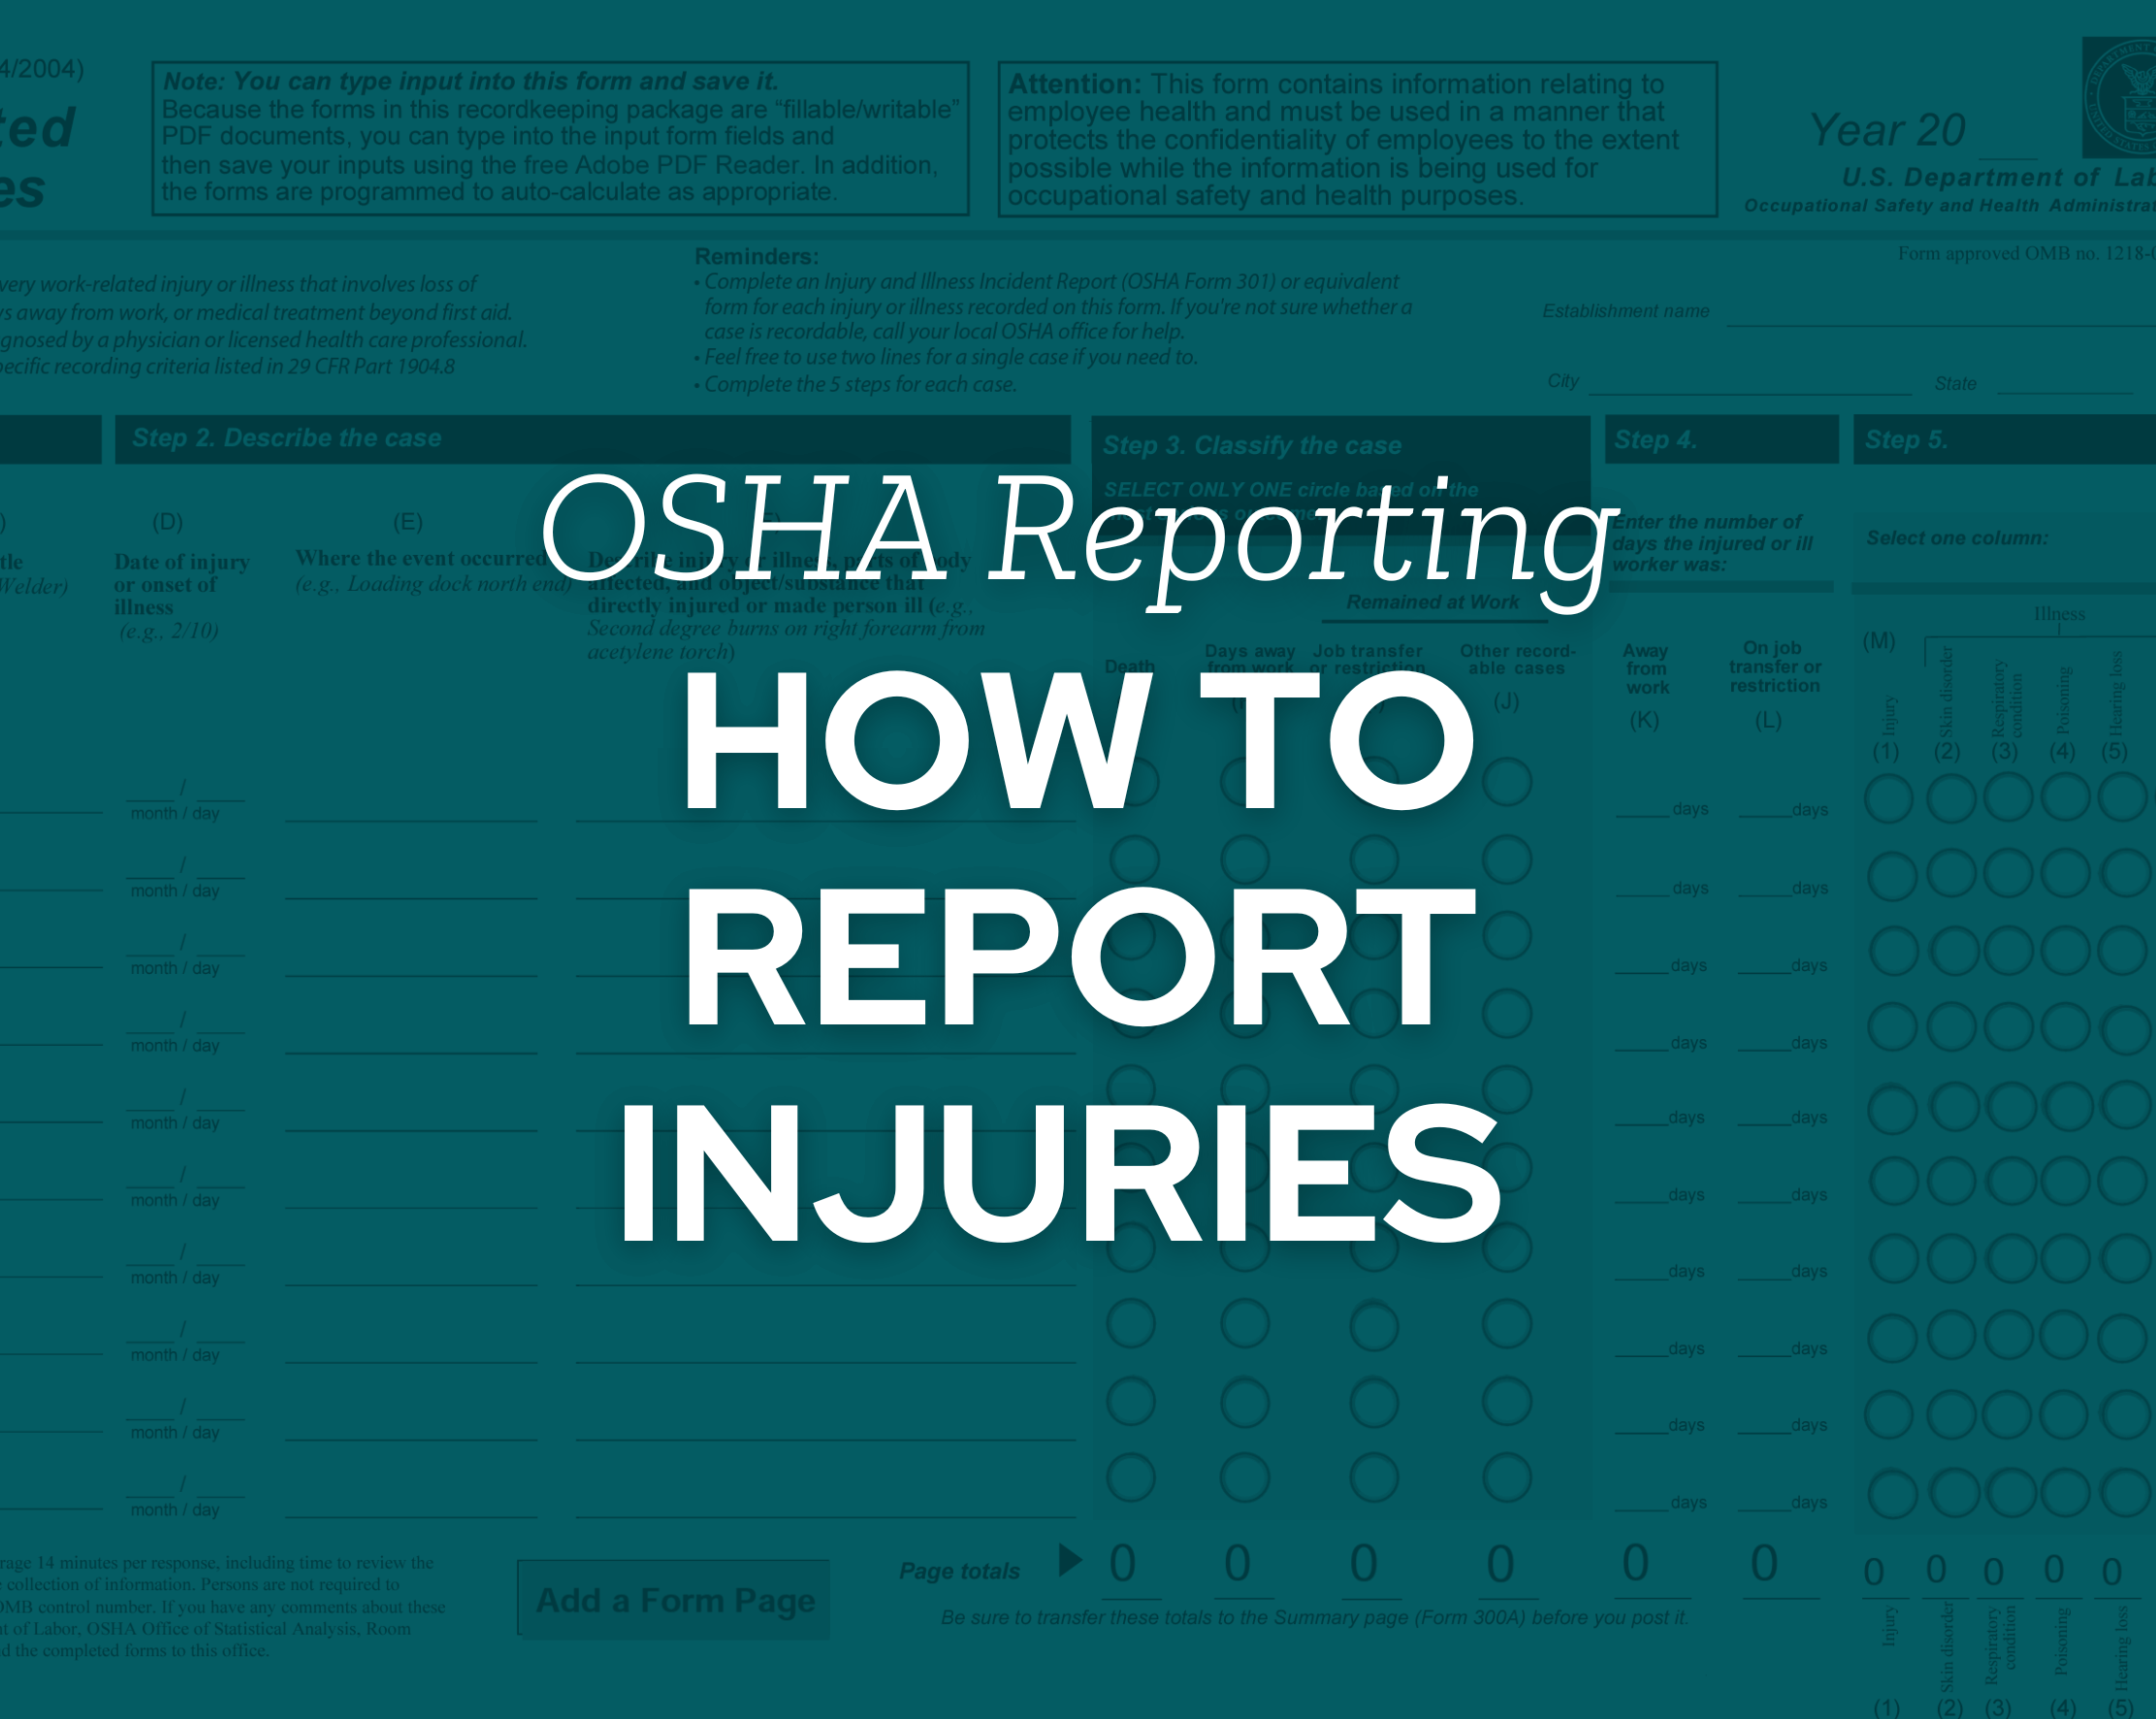 How to Record and Report Injuries and Illnesses to OSHA, in 3 Steps